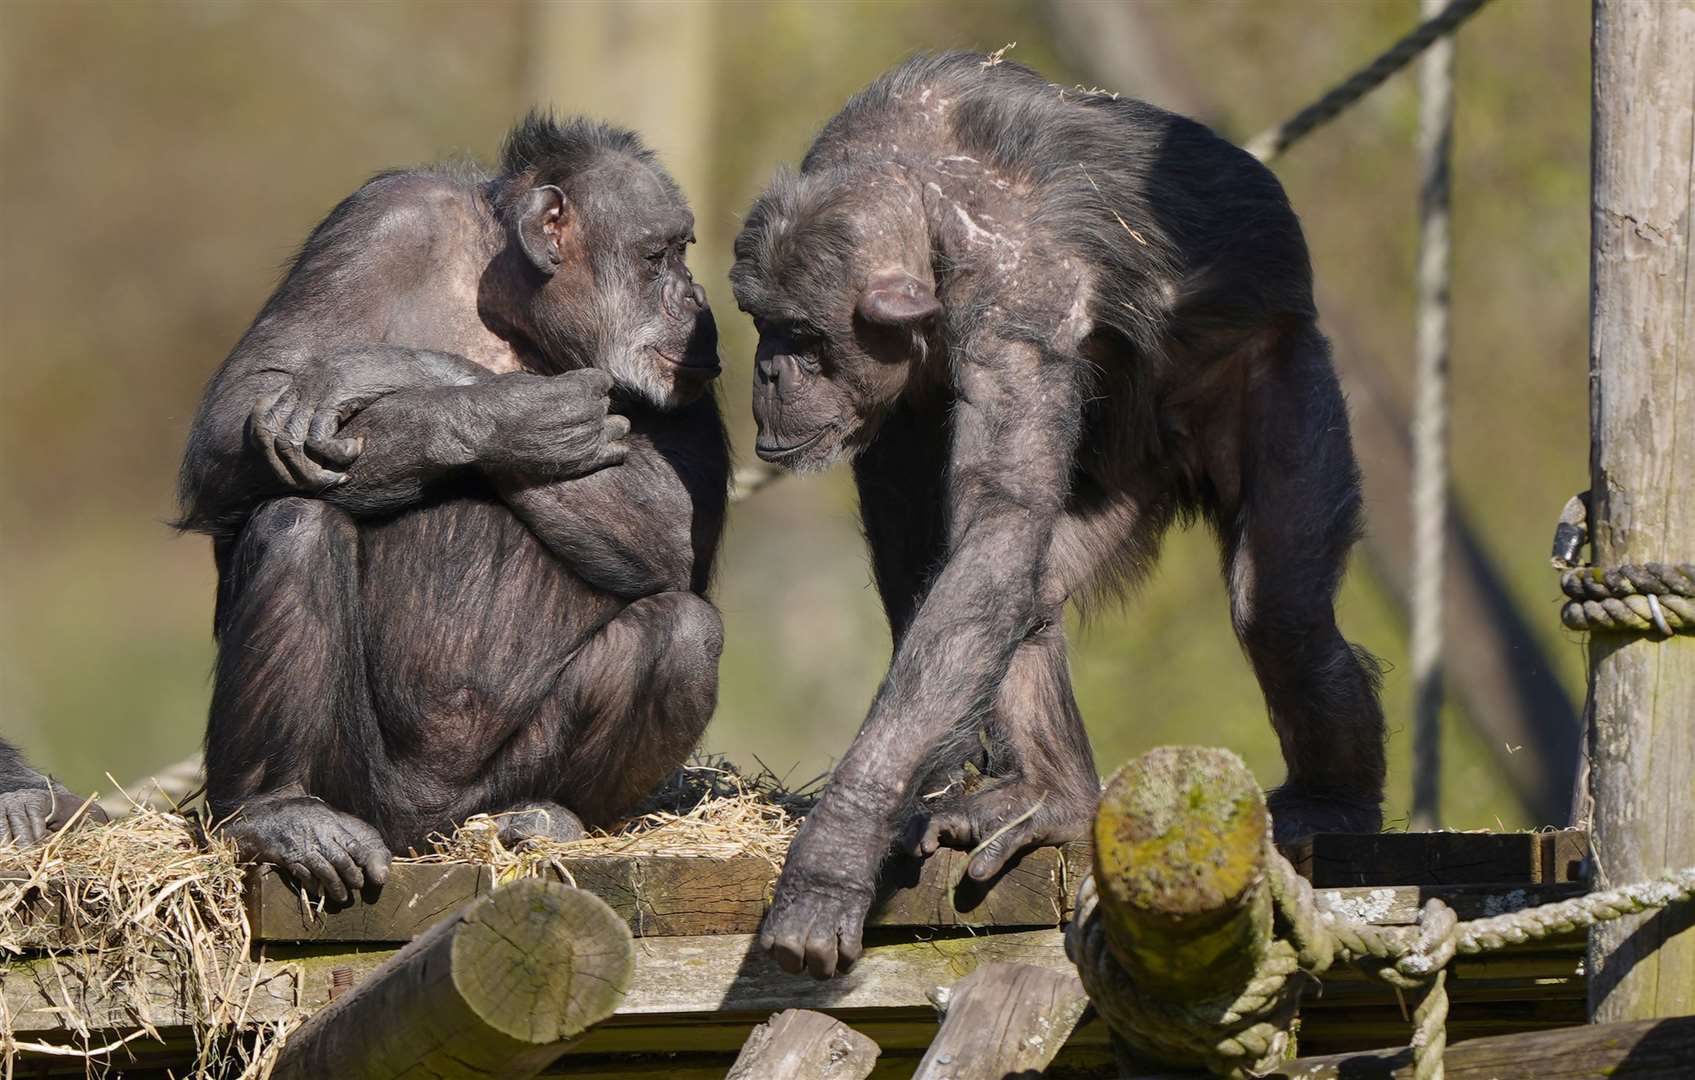 Chimpanzee Gill looks on as Peter explores (Andrew Milligan/PA)